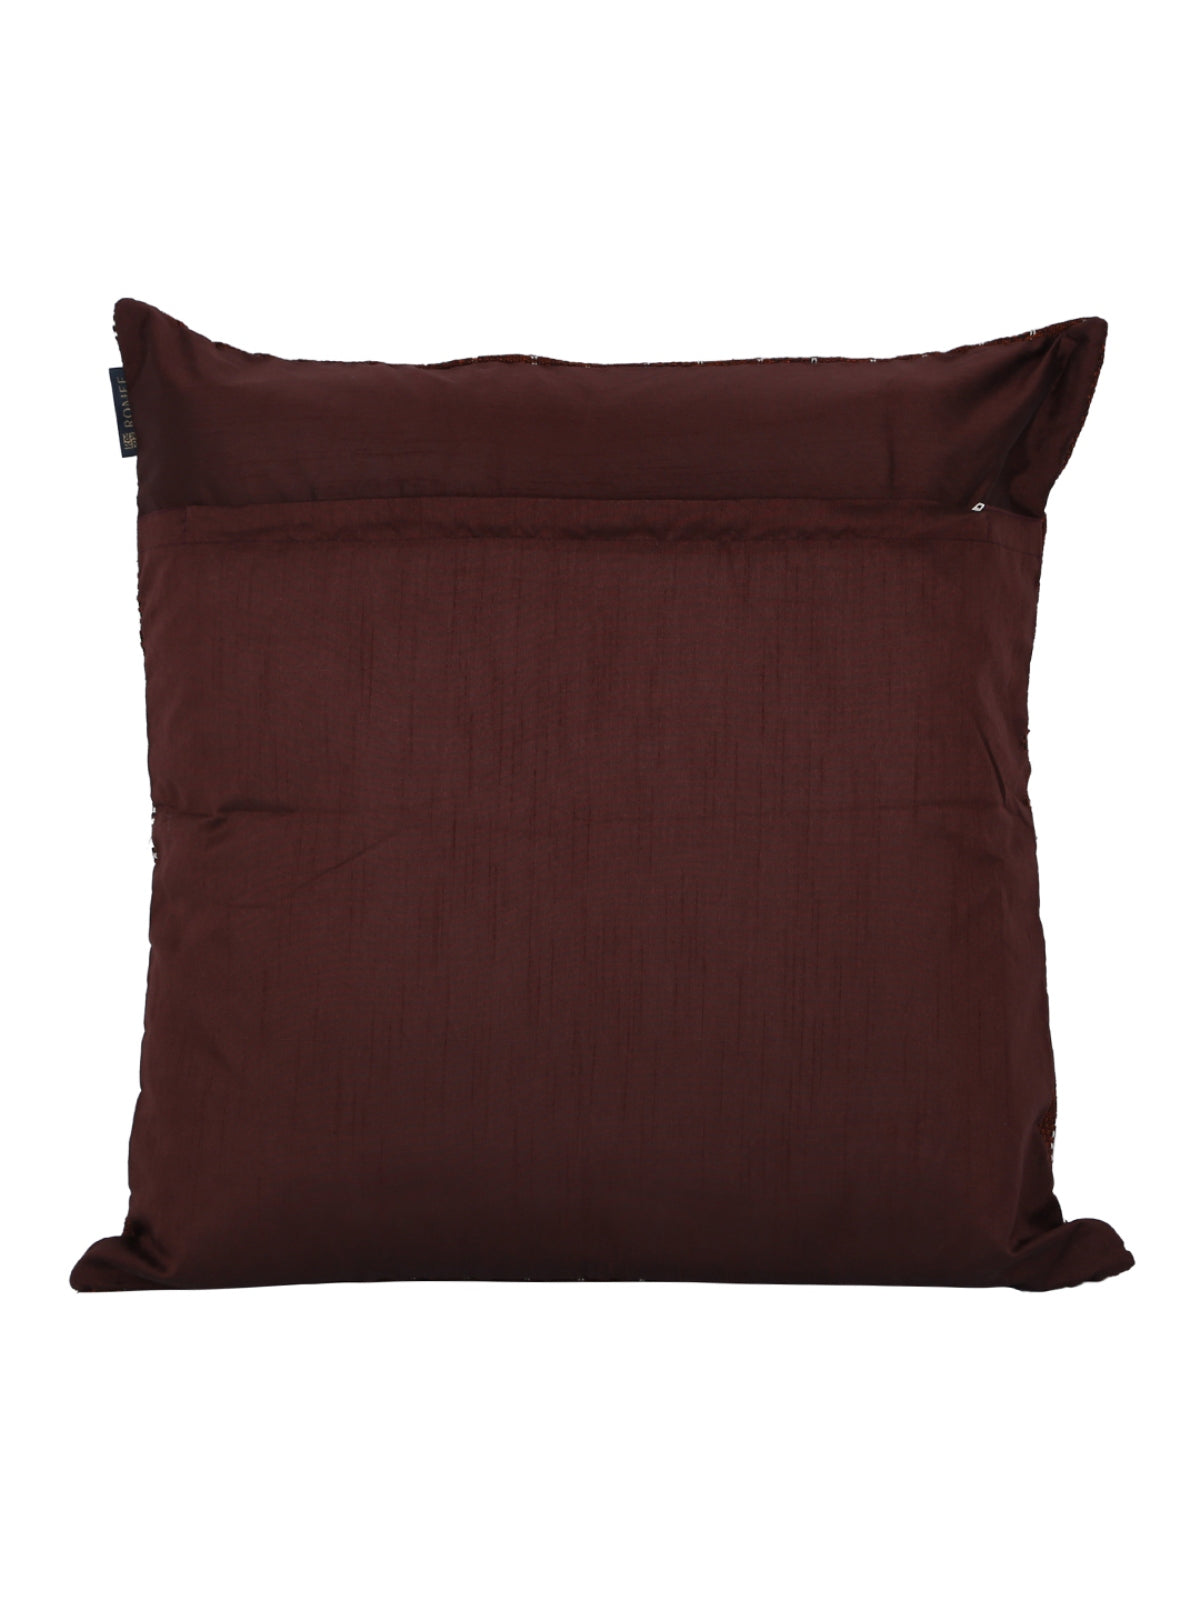 Coffee Brown Set of 2 Cushion Covers 24x24 Inch